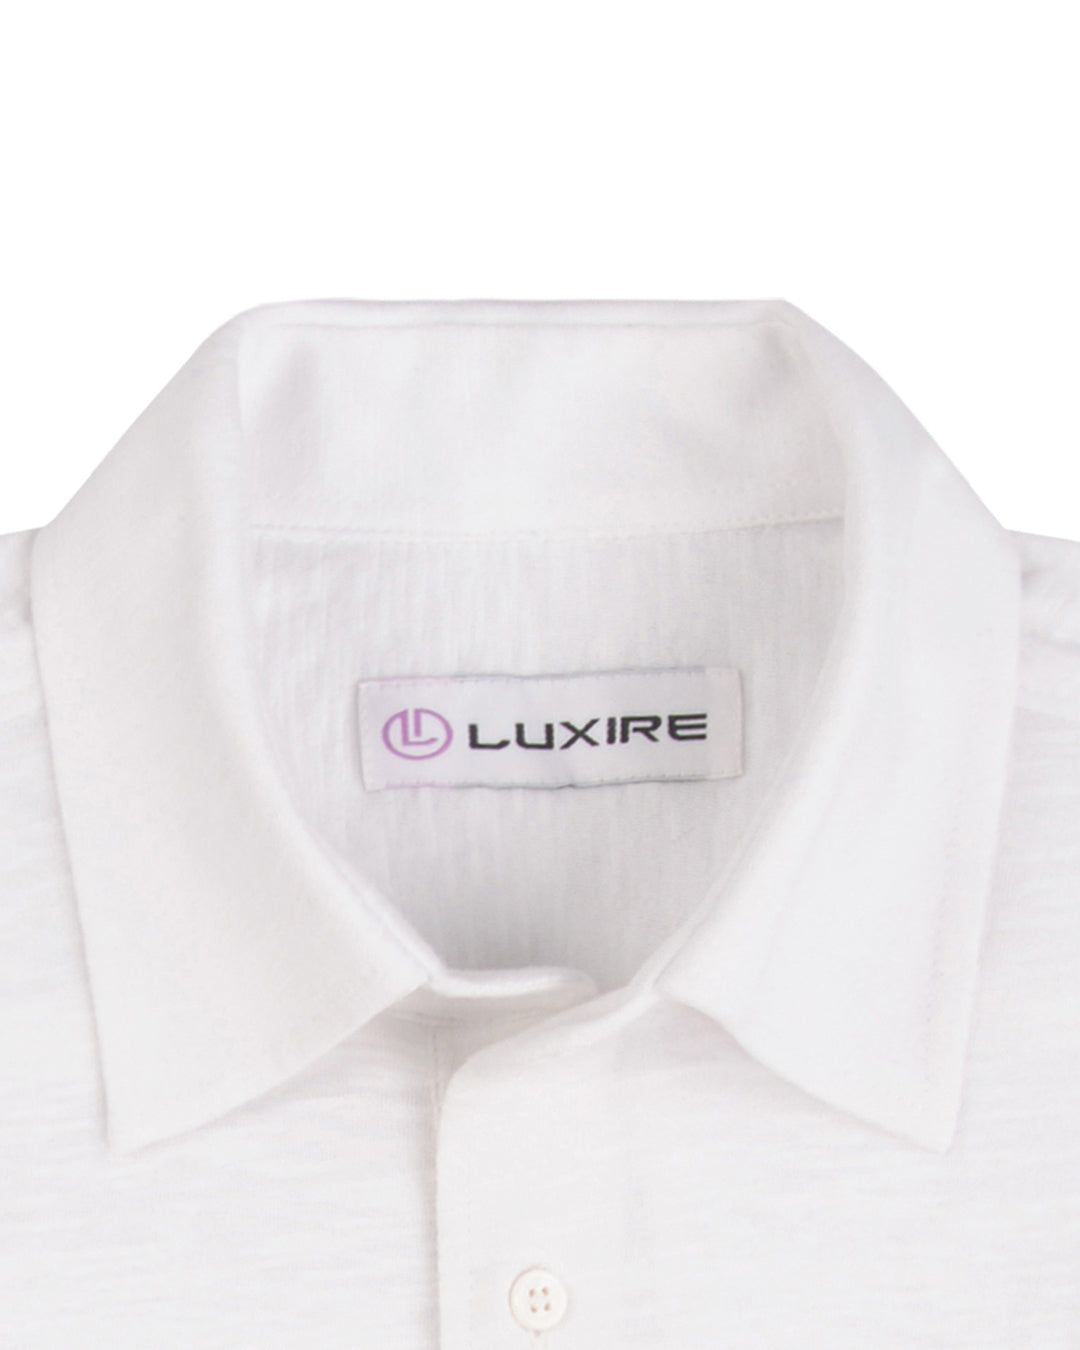 Collar of the custom oxford polo shirt for men by Luxire in white heather